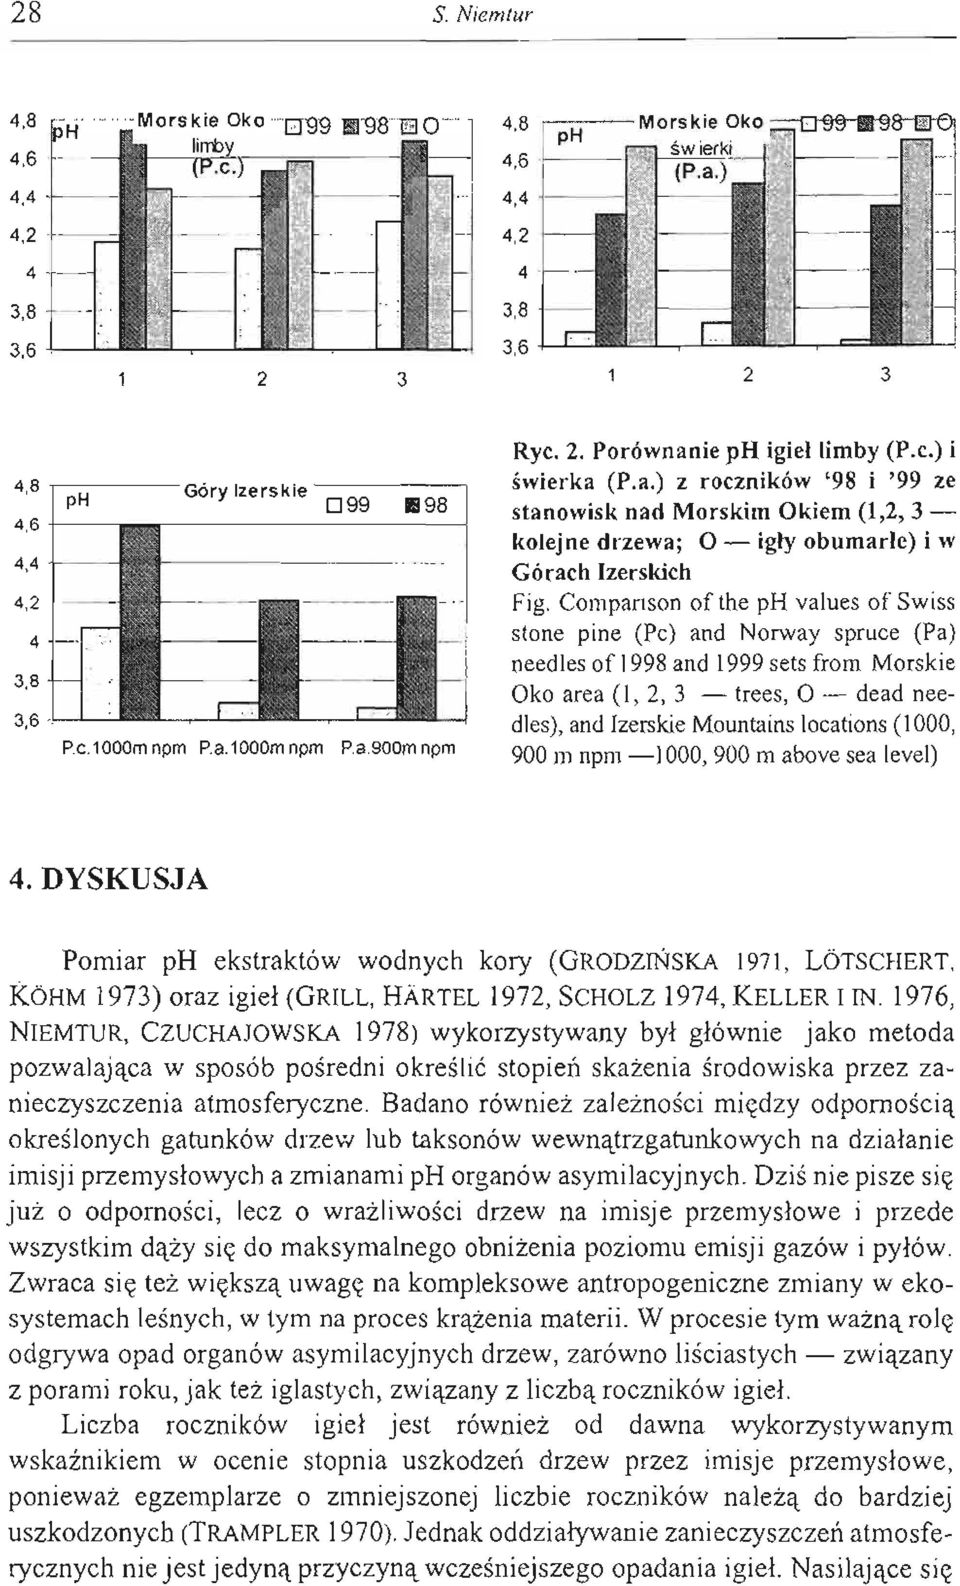 Comparison of the ph values of Swiss stone pine (Pc) and Norway spruce (Pa) needles of 1998 and 1999 sets from Morskie Oko area (1, 2, 3 - trees, 0- dead needl es), and Izerskie MOlmtains locations